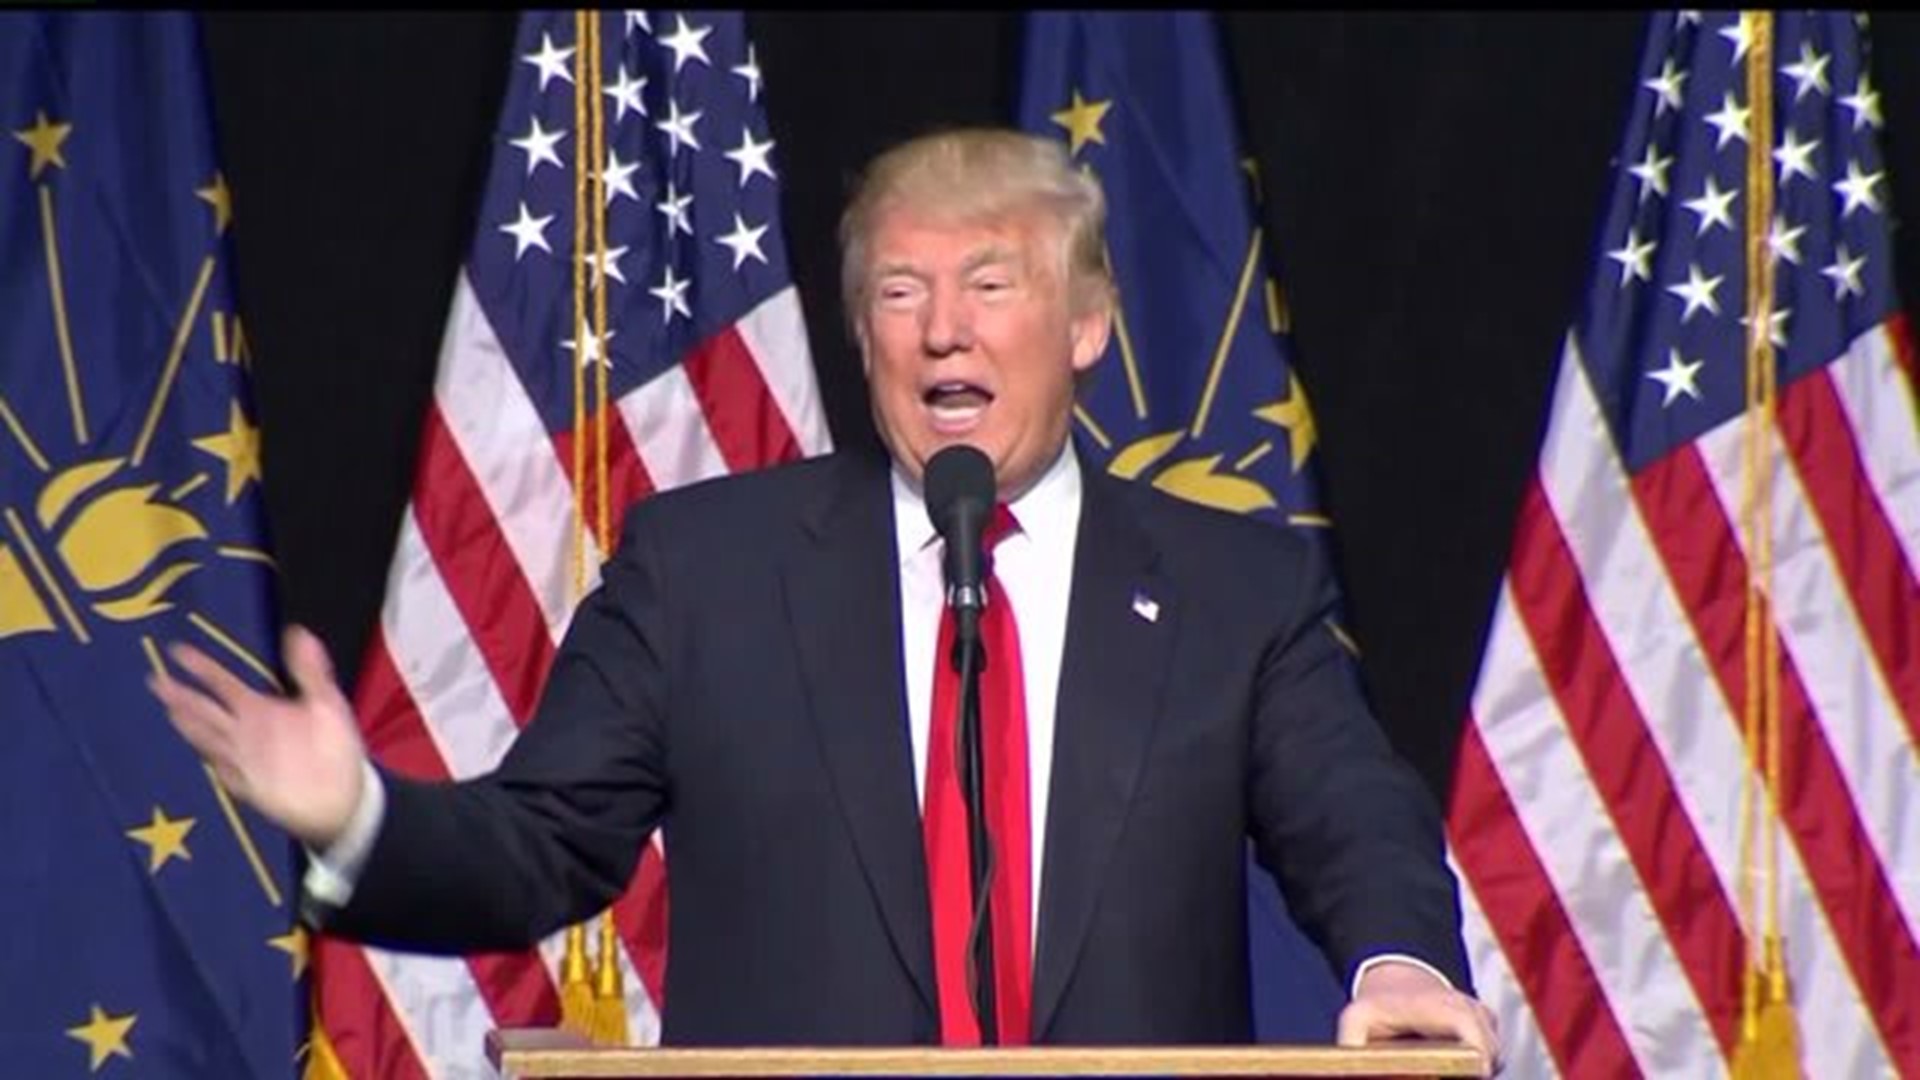 Trump makes his first stop in Central PA